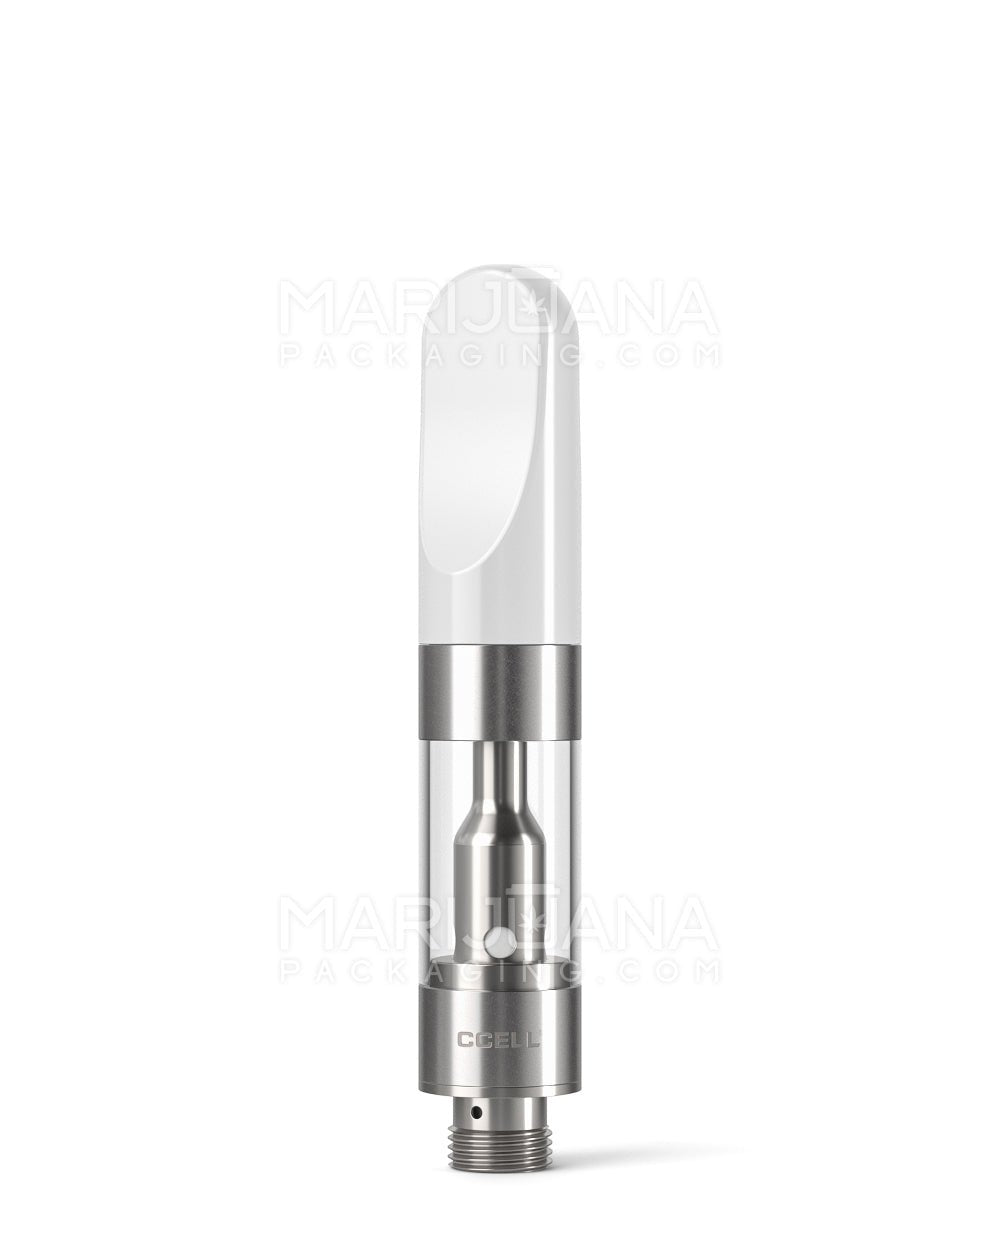 CCELL | Plastic Vape Cartridge with White Plastic Mouthpiece | 0.5mL - Press On - 100 Count - 1